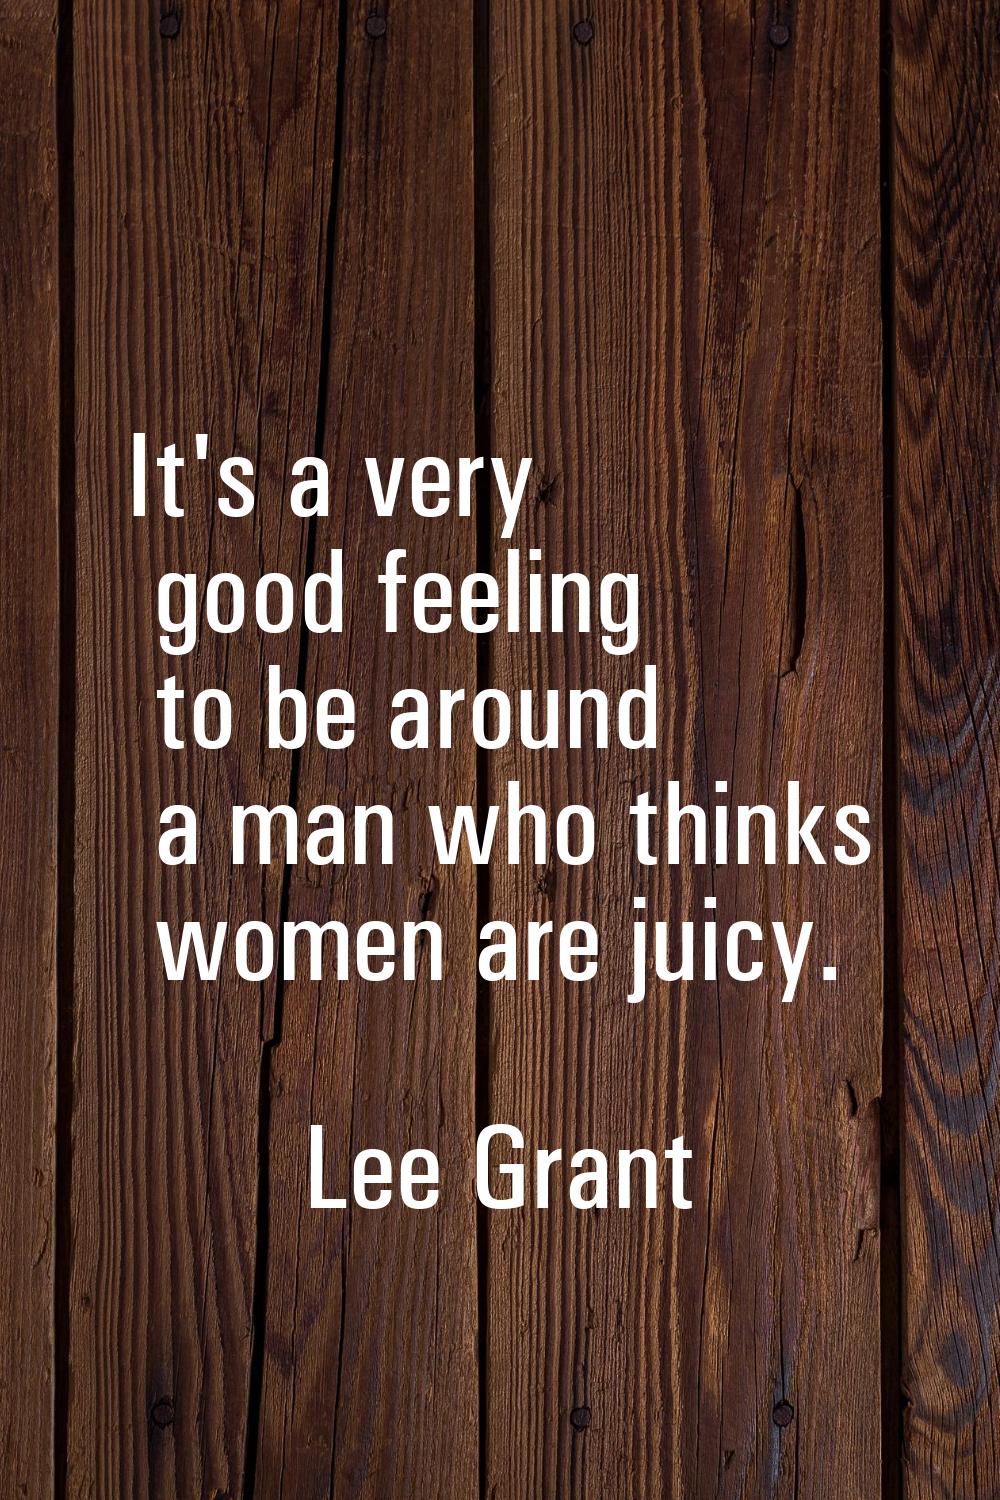 It's a very good feeling to be around a man who thinks women are juicy.